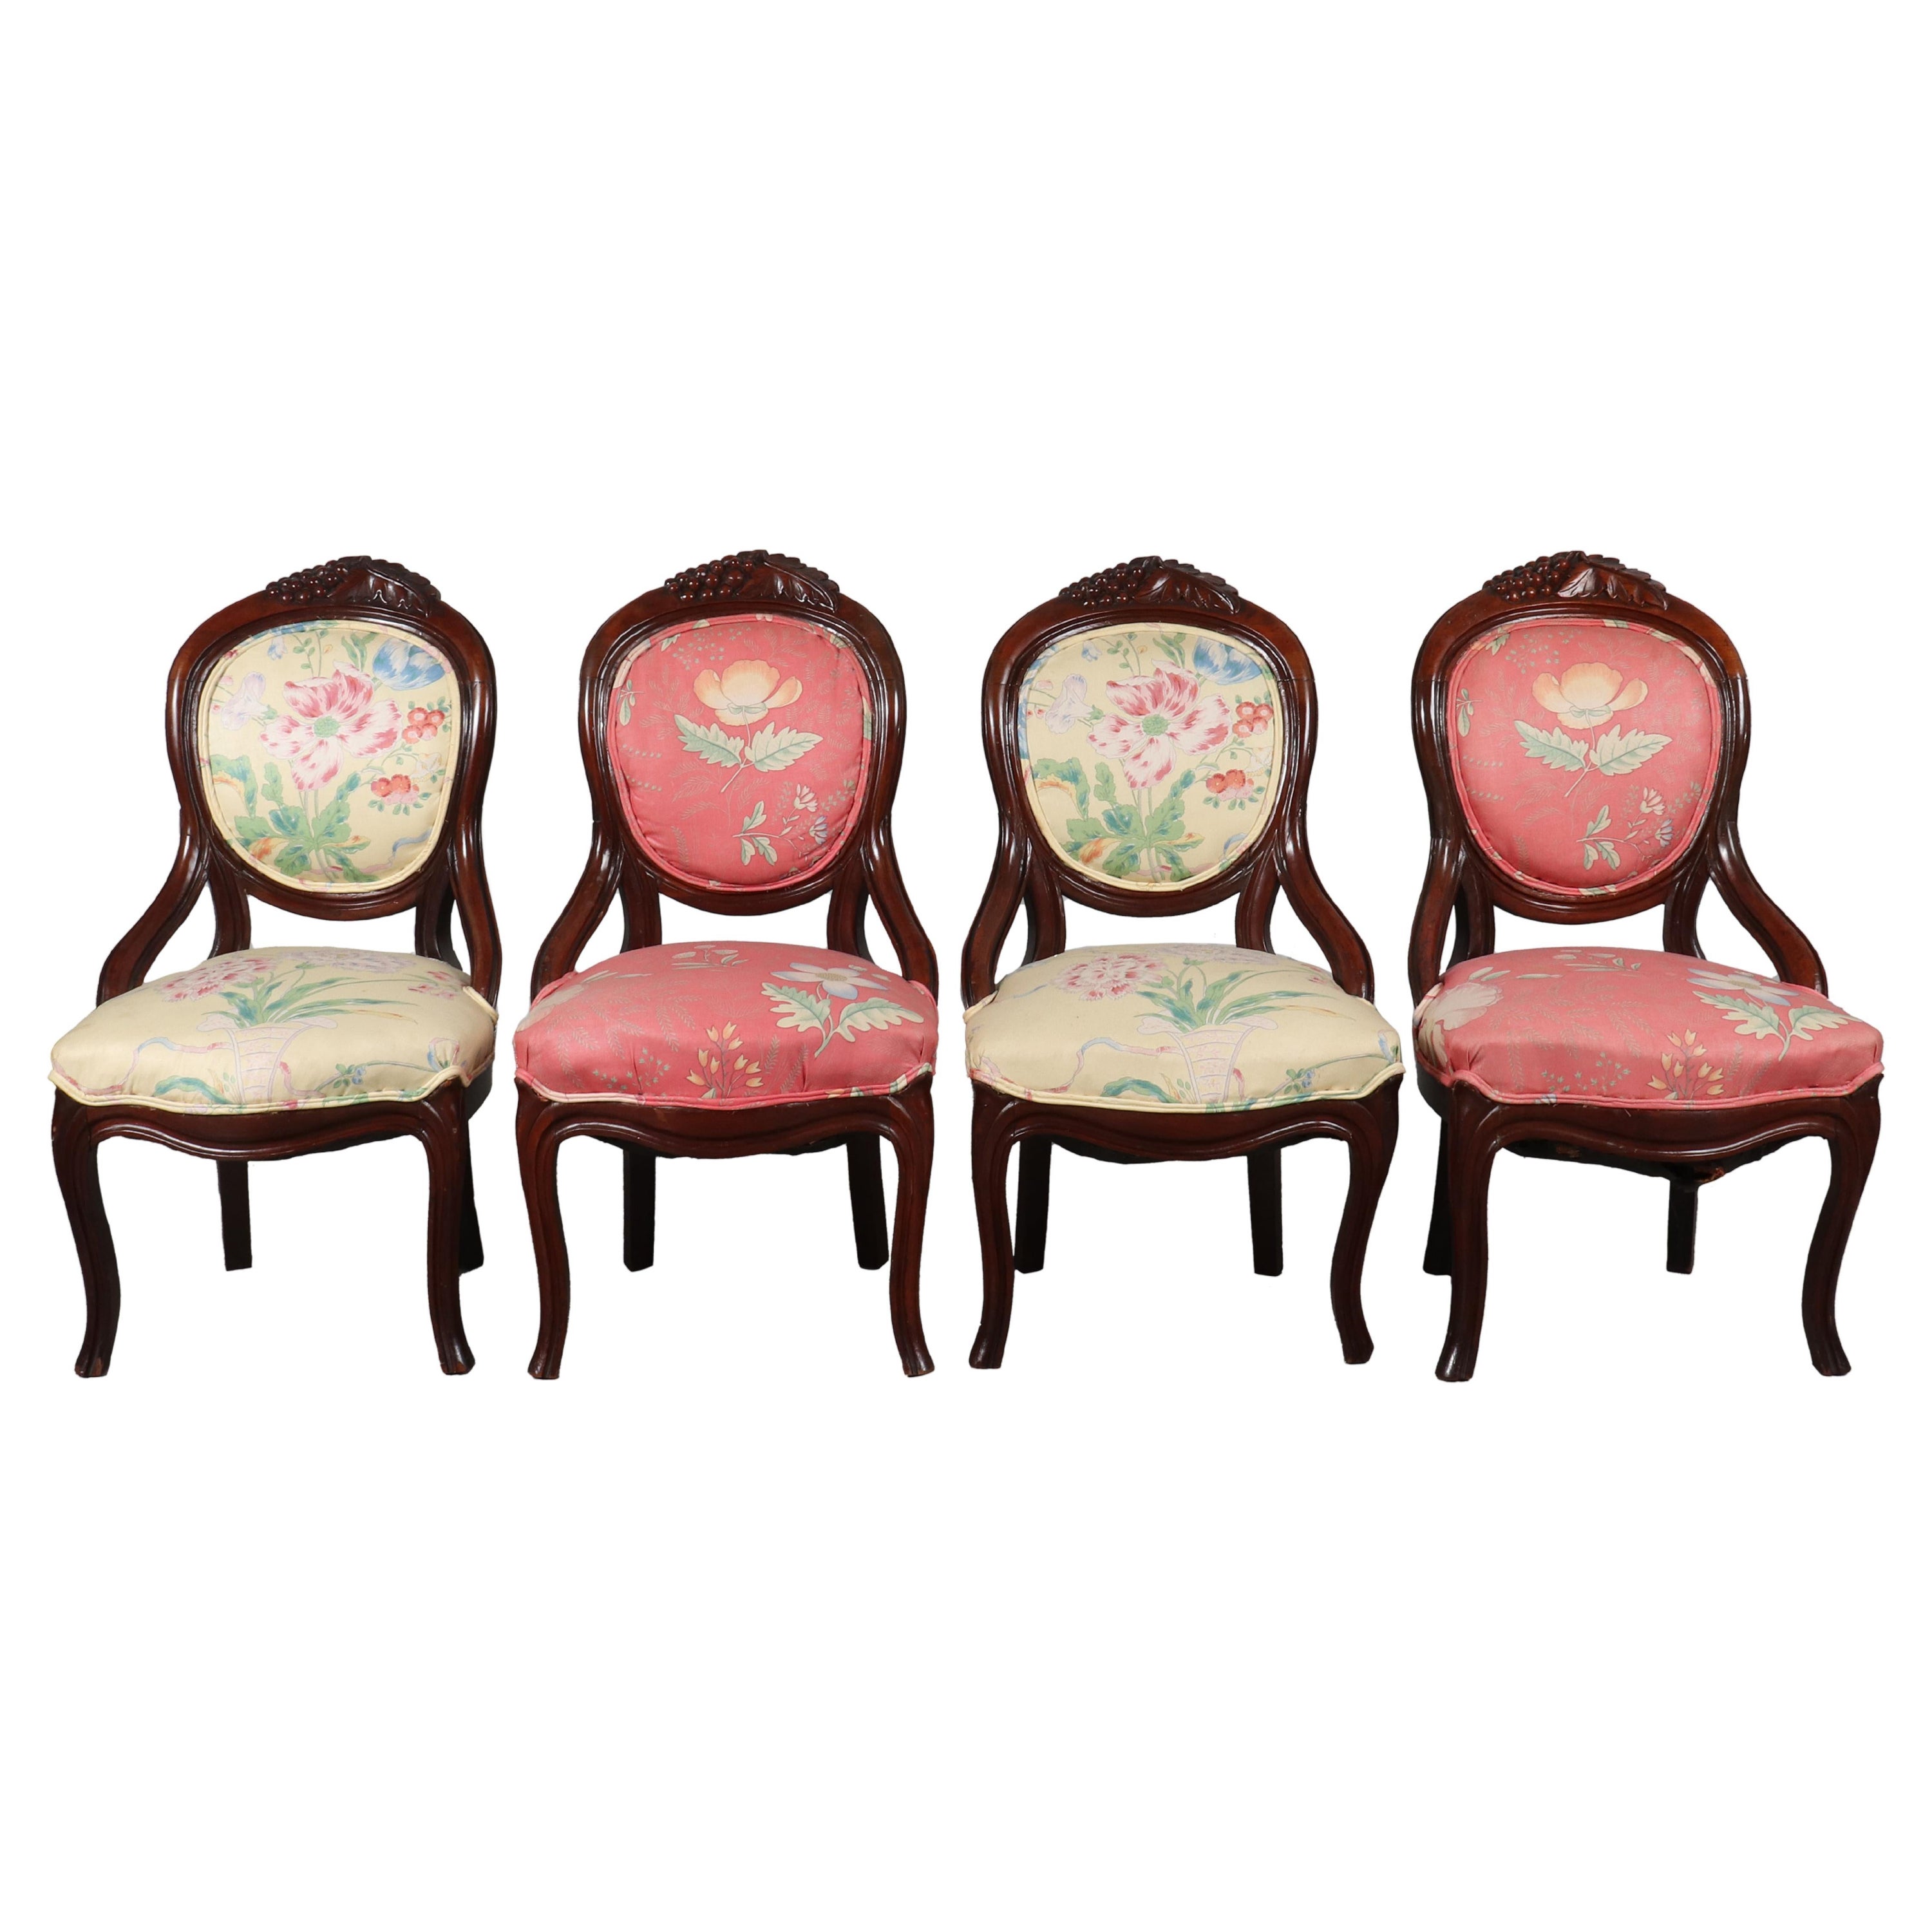 American Rococo Revival Style Wooden Chairs For Sale